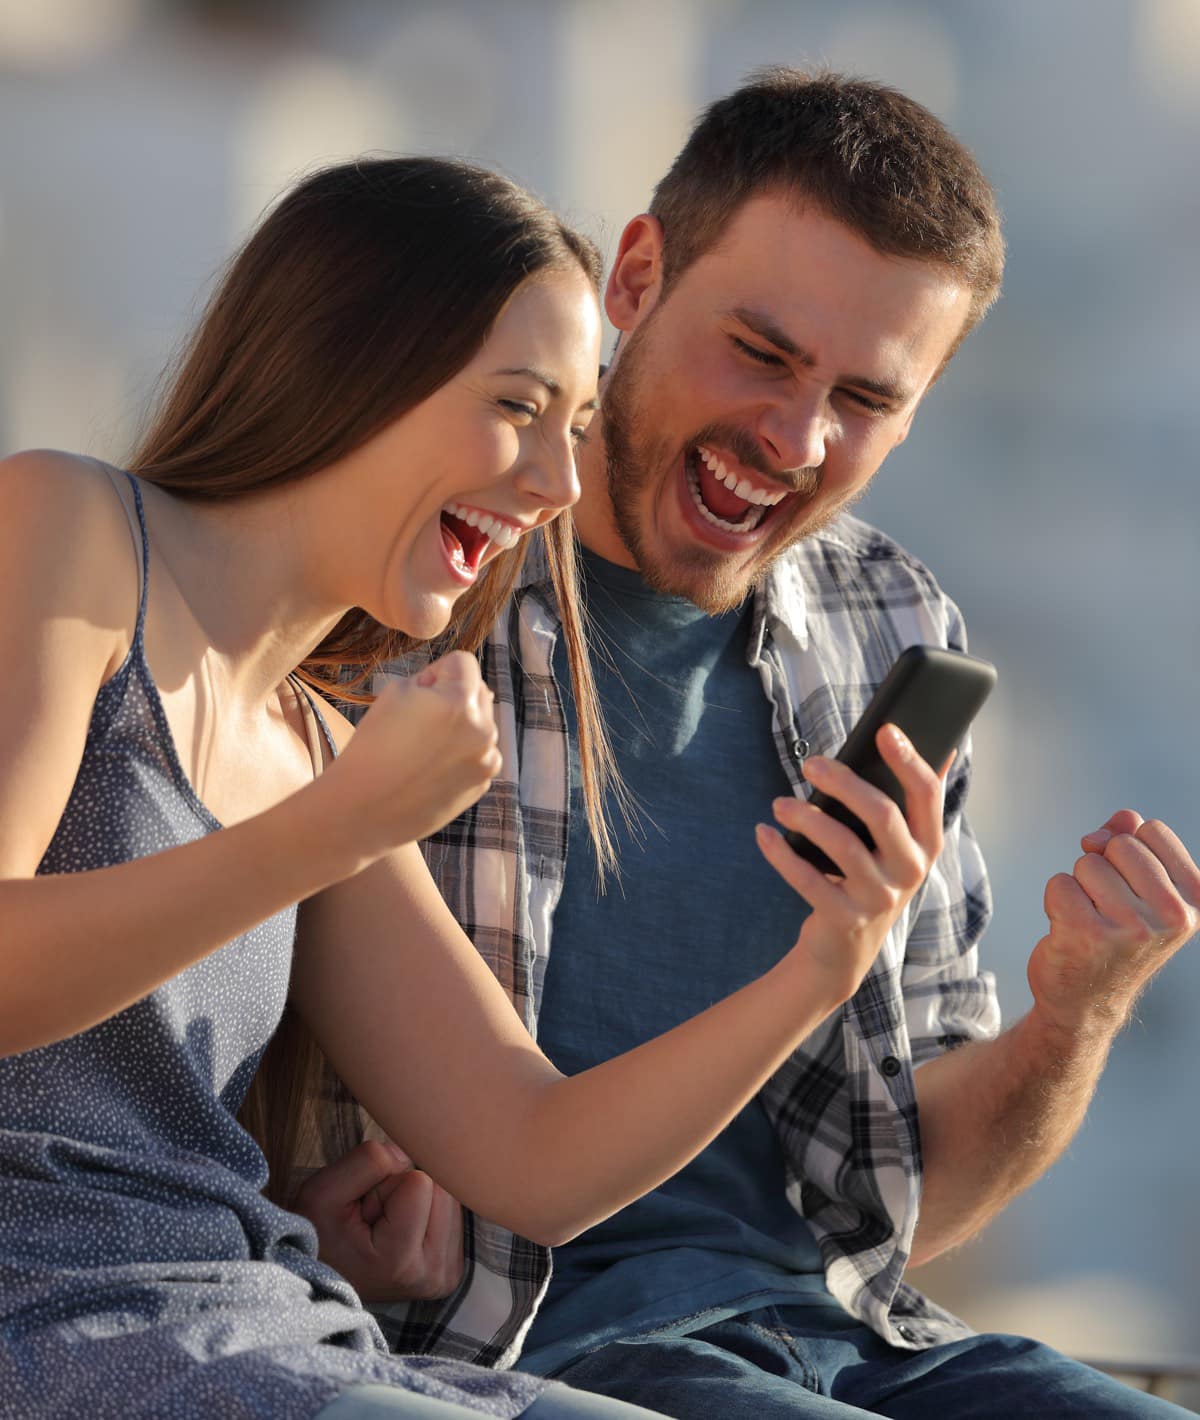 Guy and a girl looking into a phone and rejoicing